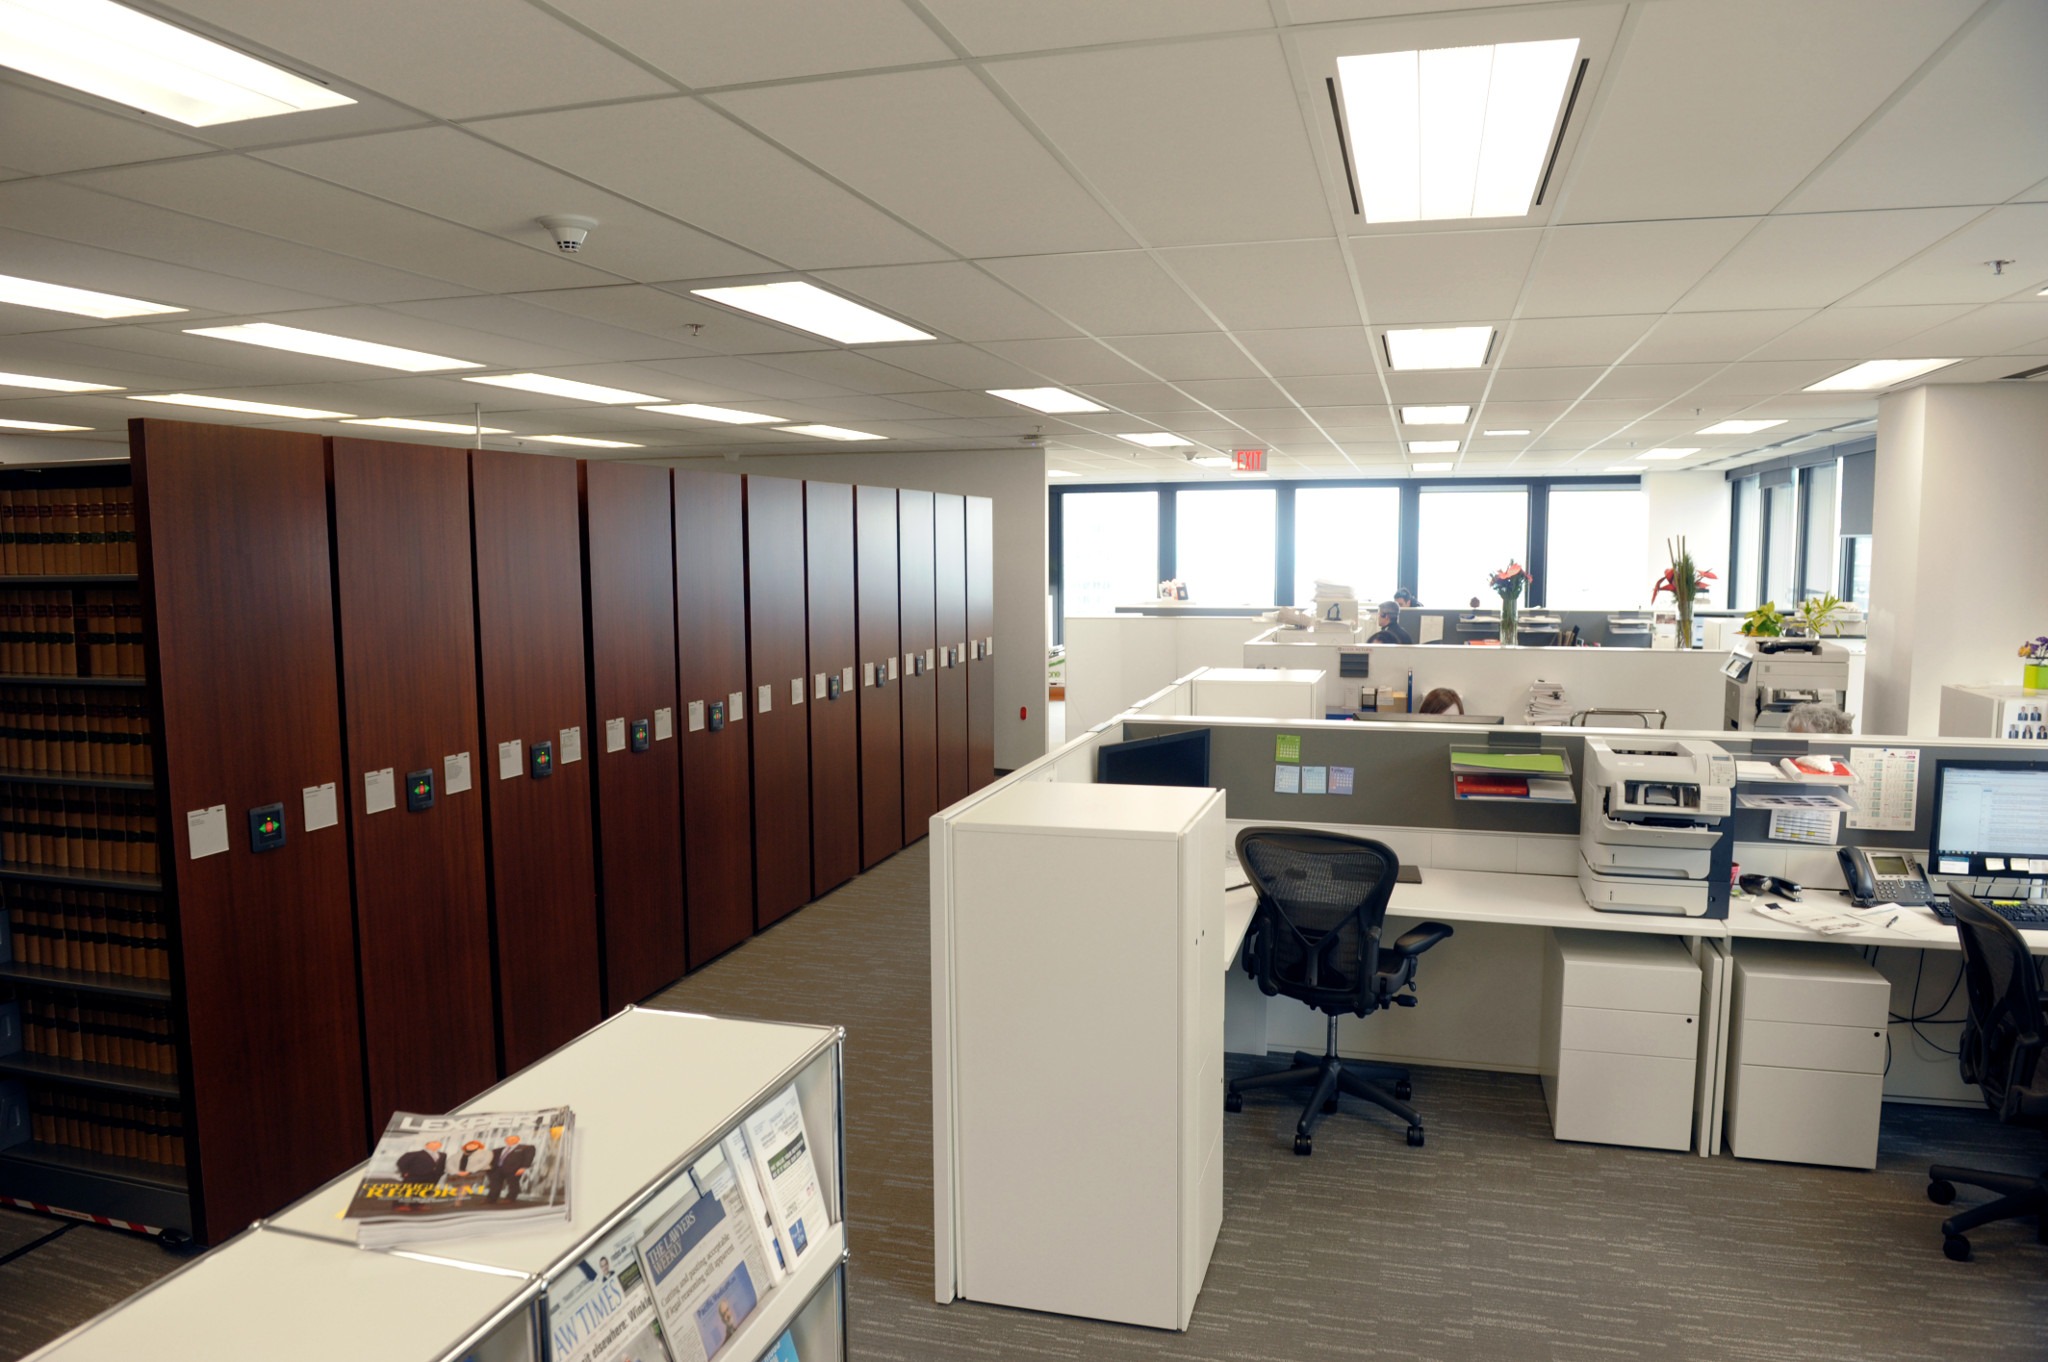 Collaborative Law Firm with Compact Storage System